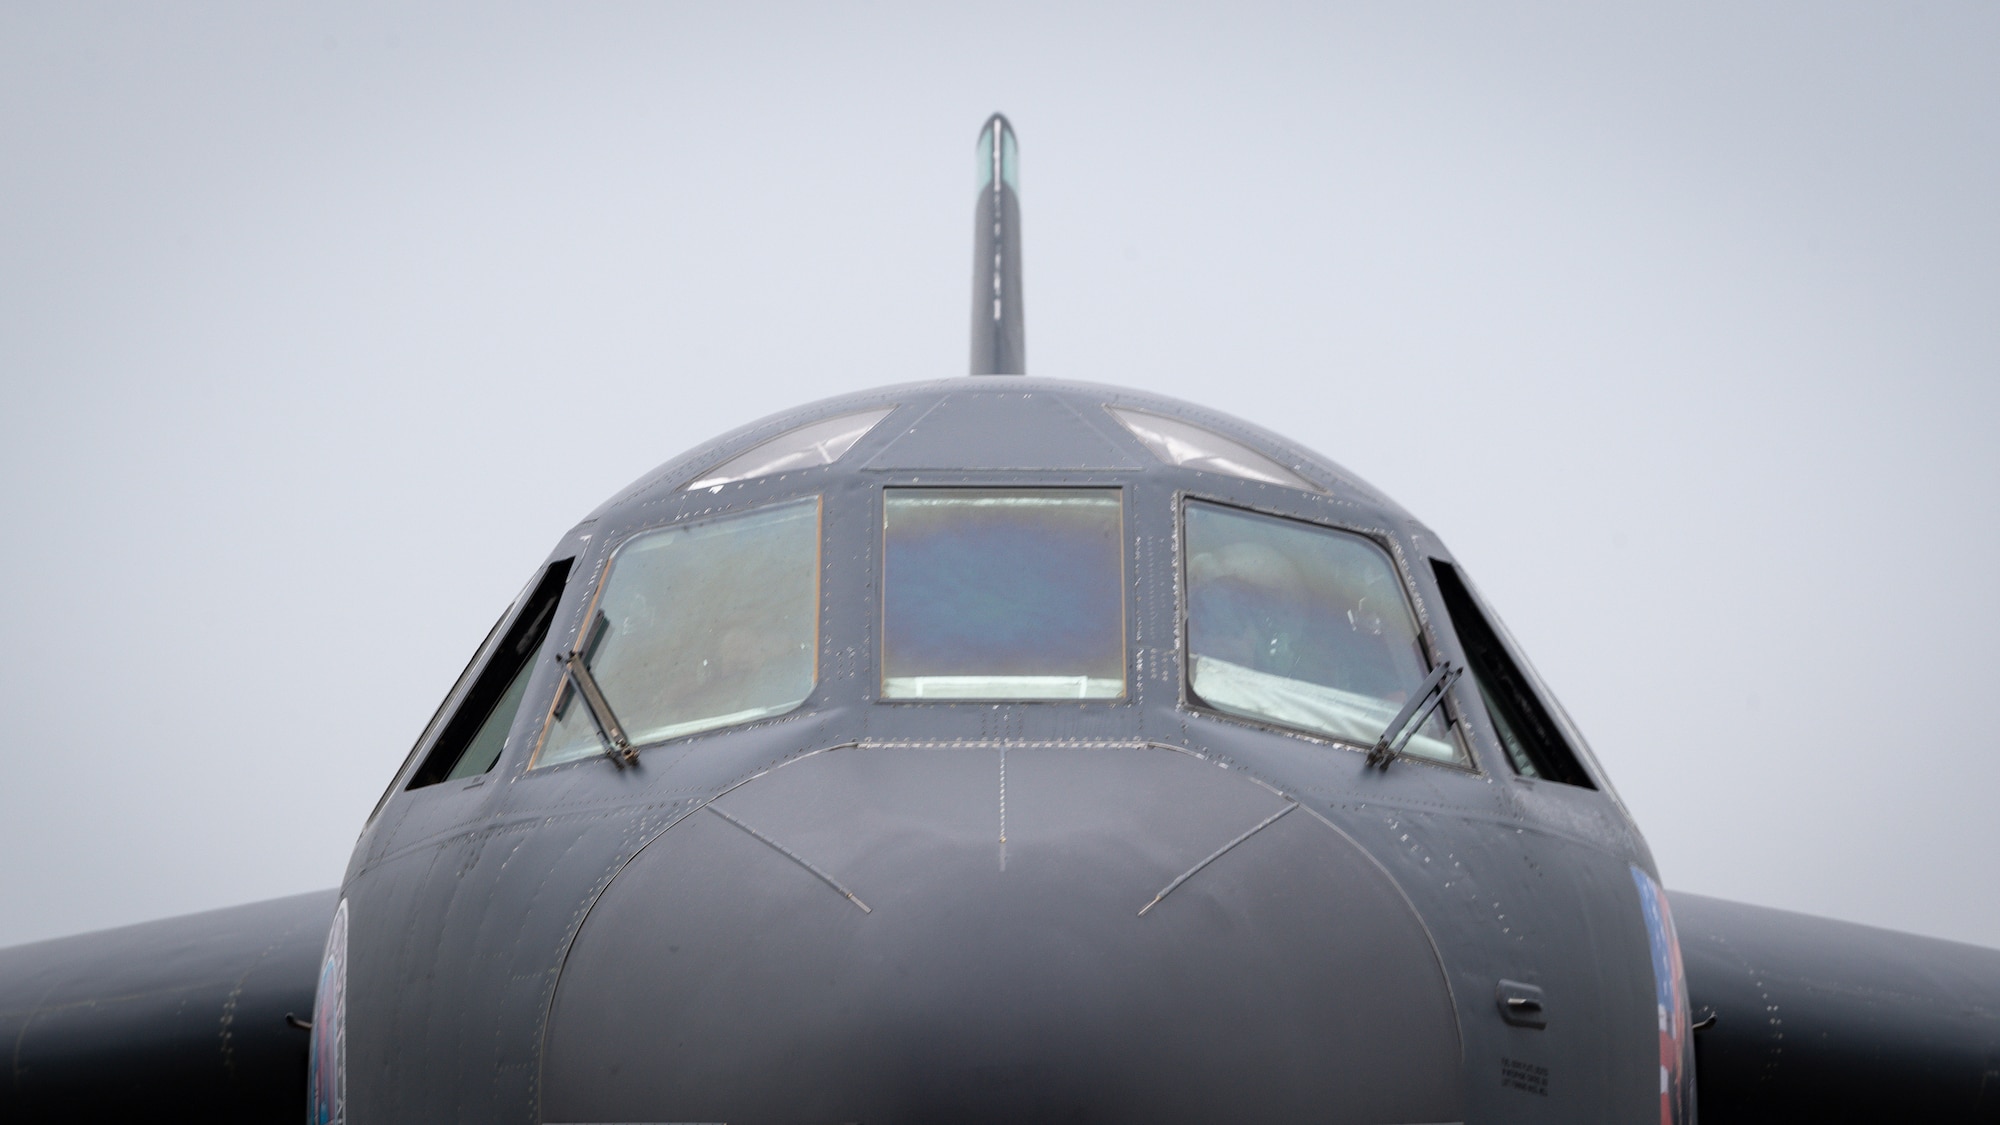 A B-52H Stratofortress is prepared for departure at Barksdale Air Force Base, Louisiana, April 28, 2021.